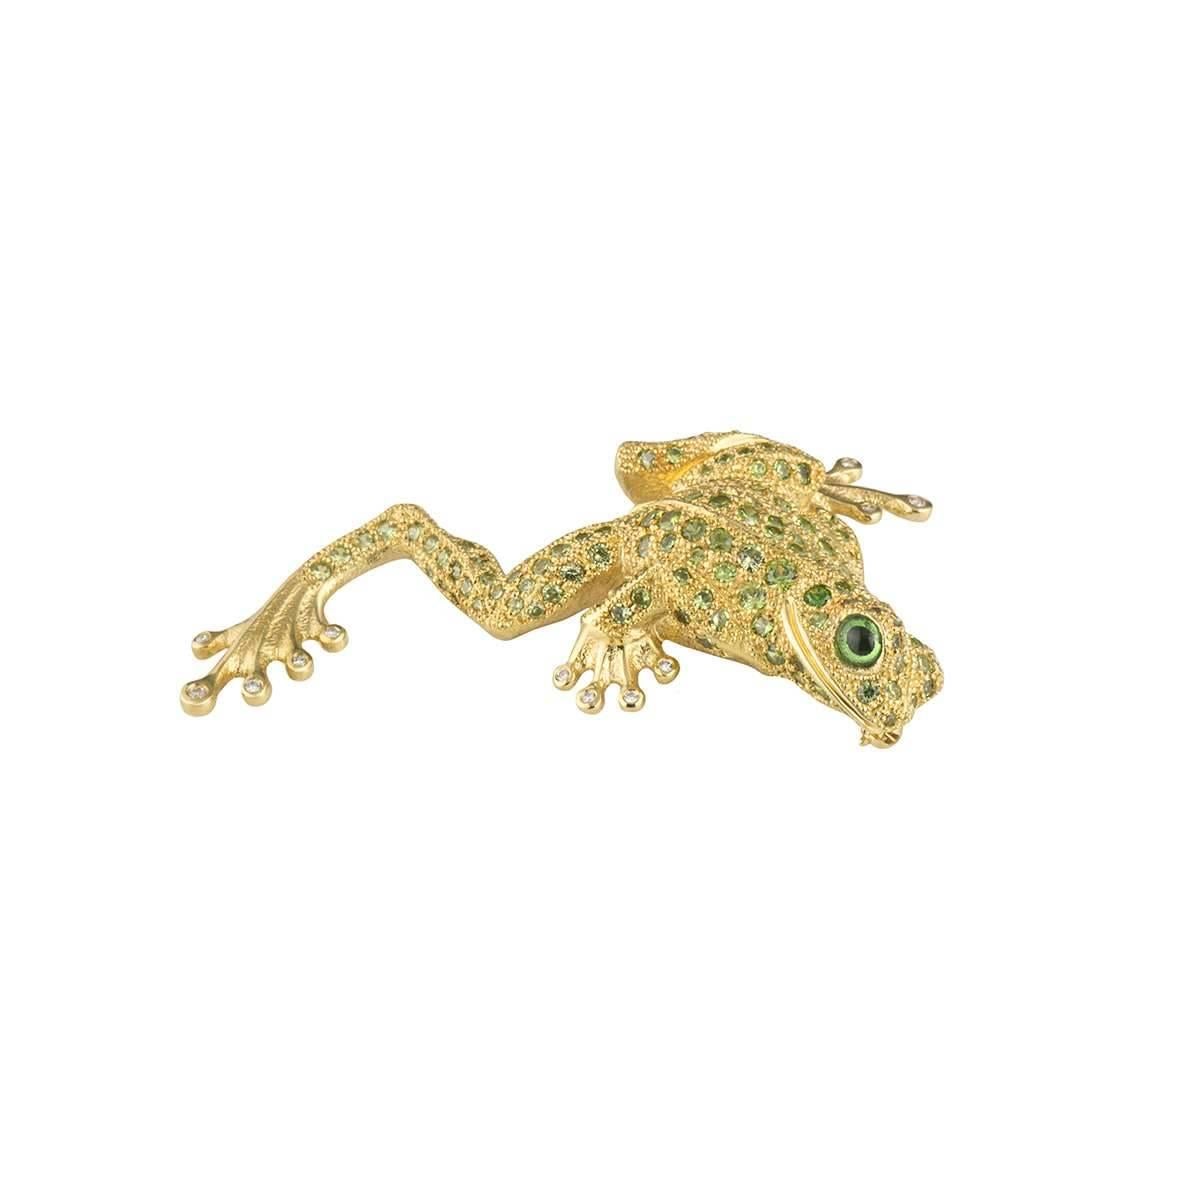 A unique 18k yellow gold diamond and peridot brooch. The brooch comprises of a frog motif pave set with 152 round brilliant cut peridots with a cabachon cut peridot as the frog's eye. The frog shows hands and feet with 13 round brilliant cut